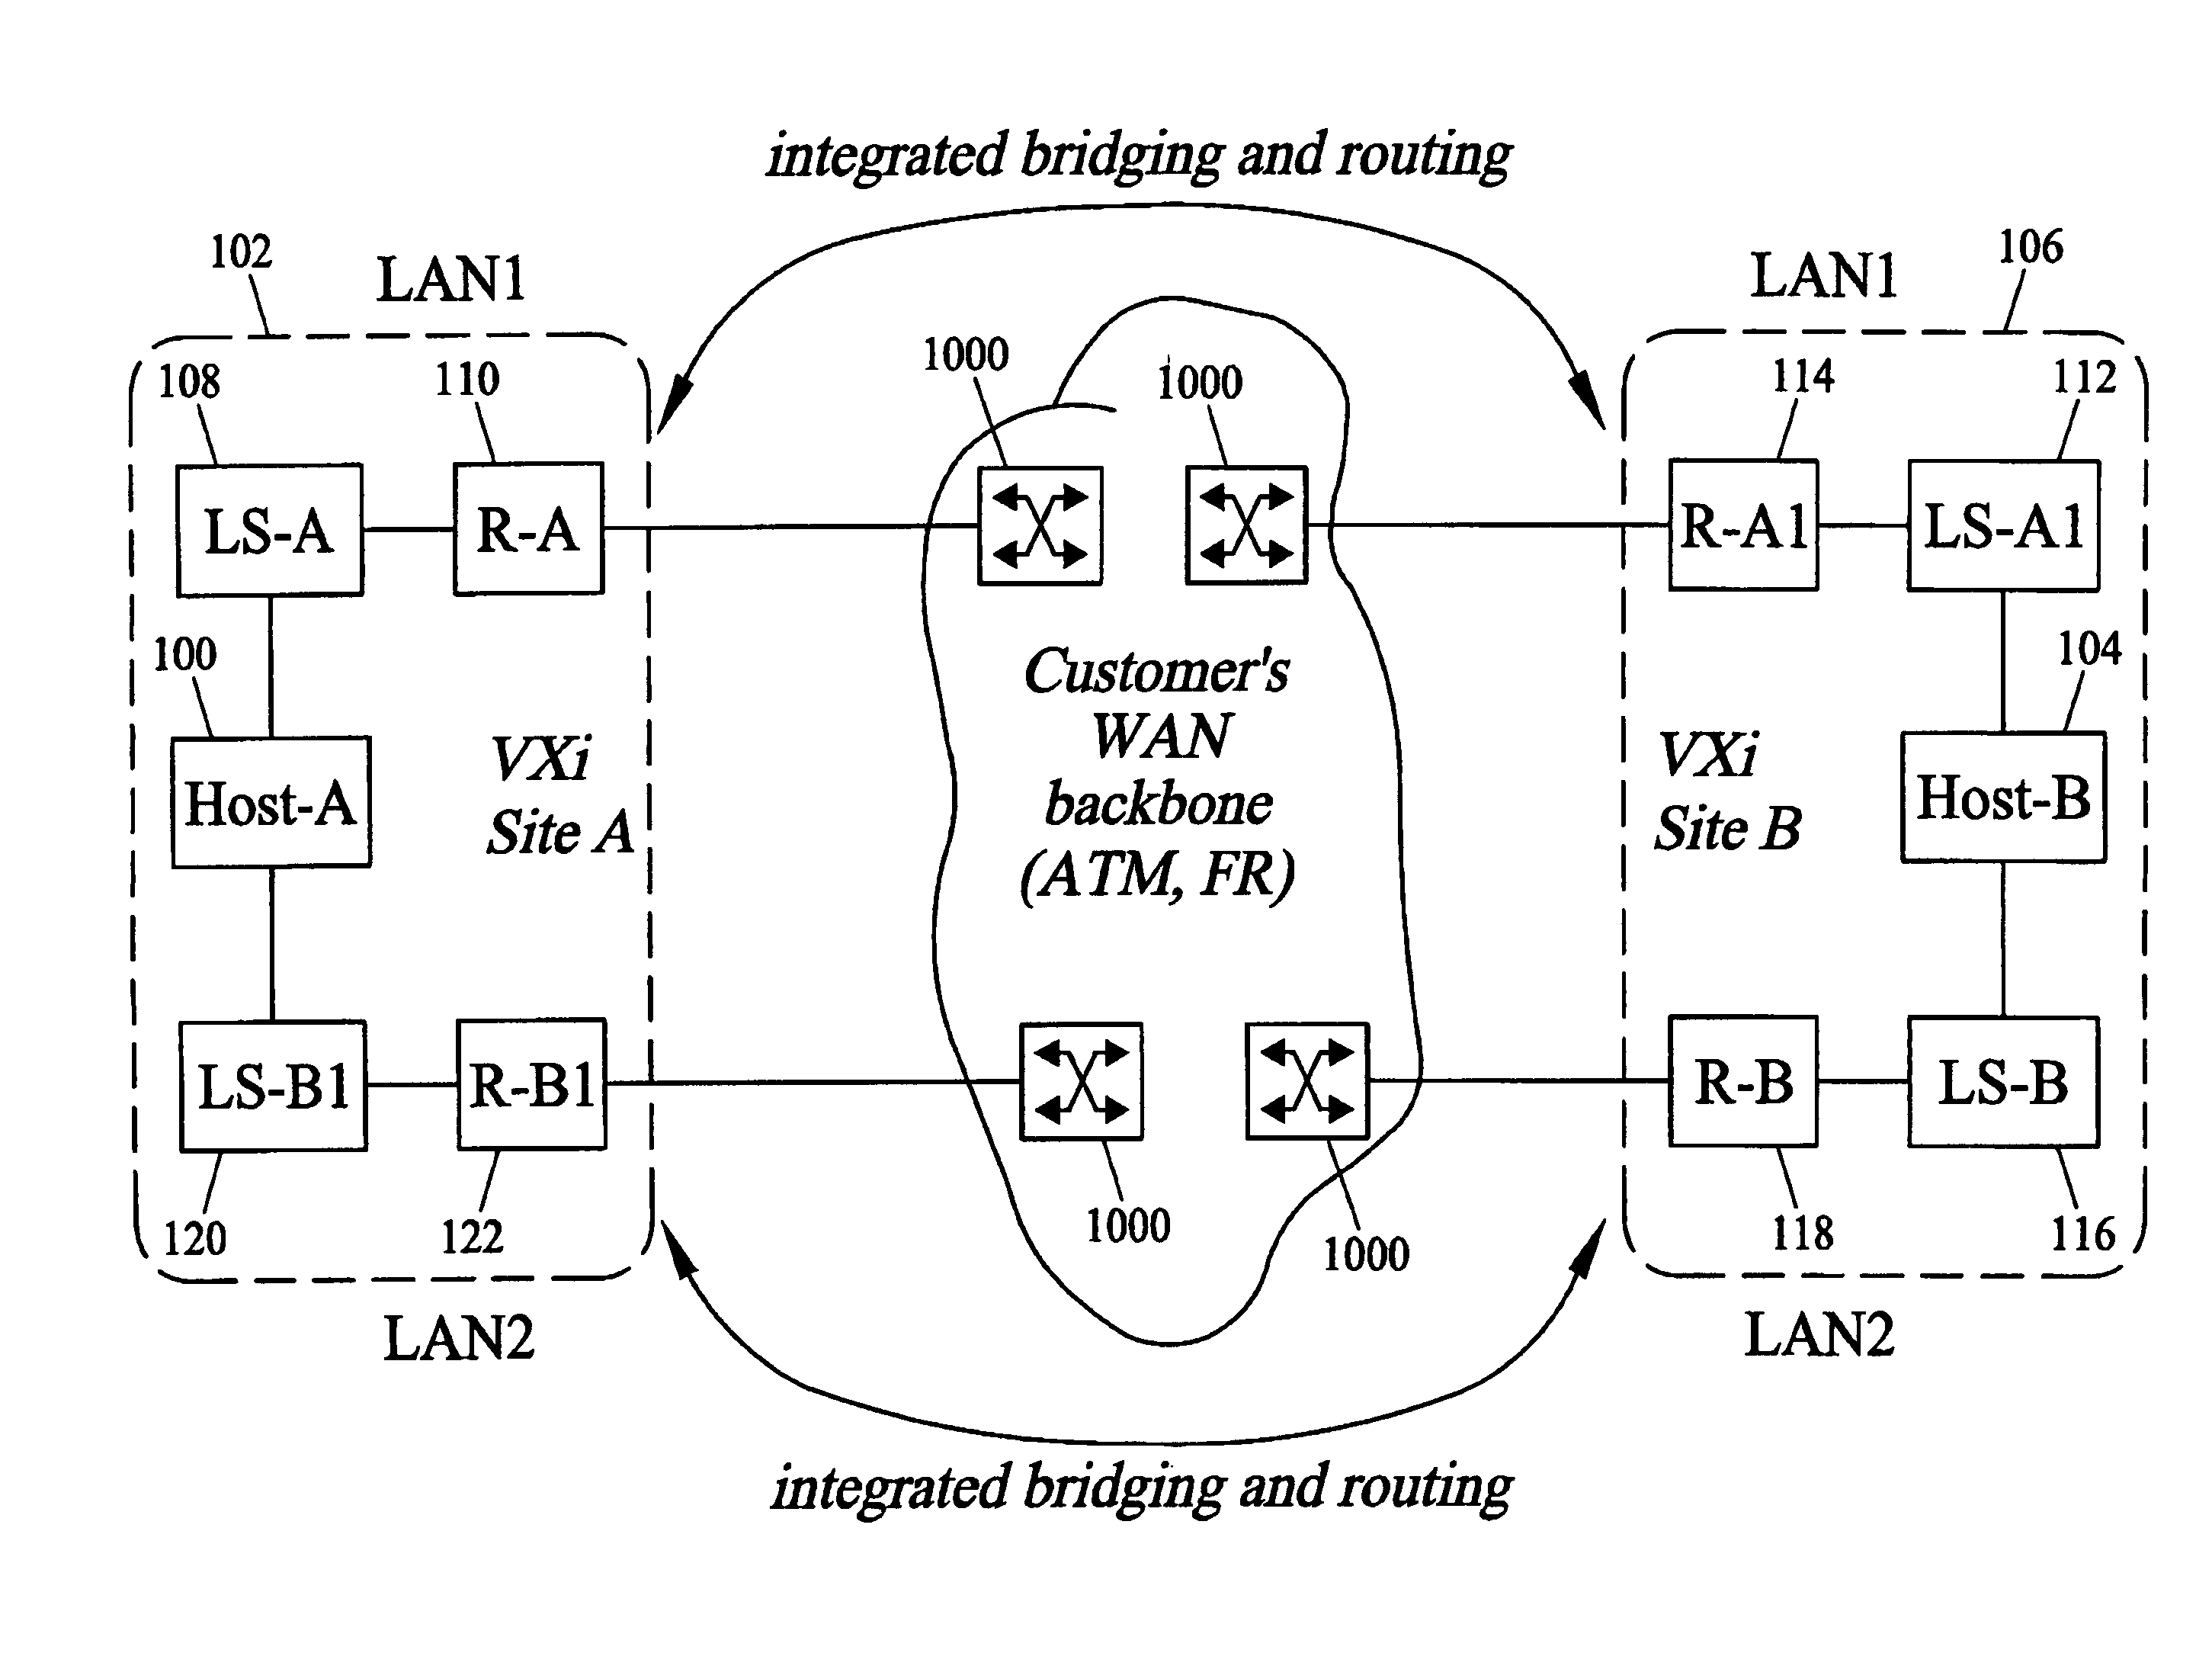 Methods and systems for locating redundant telephony call processing hosts in geographically separate locations